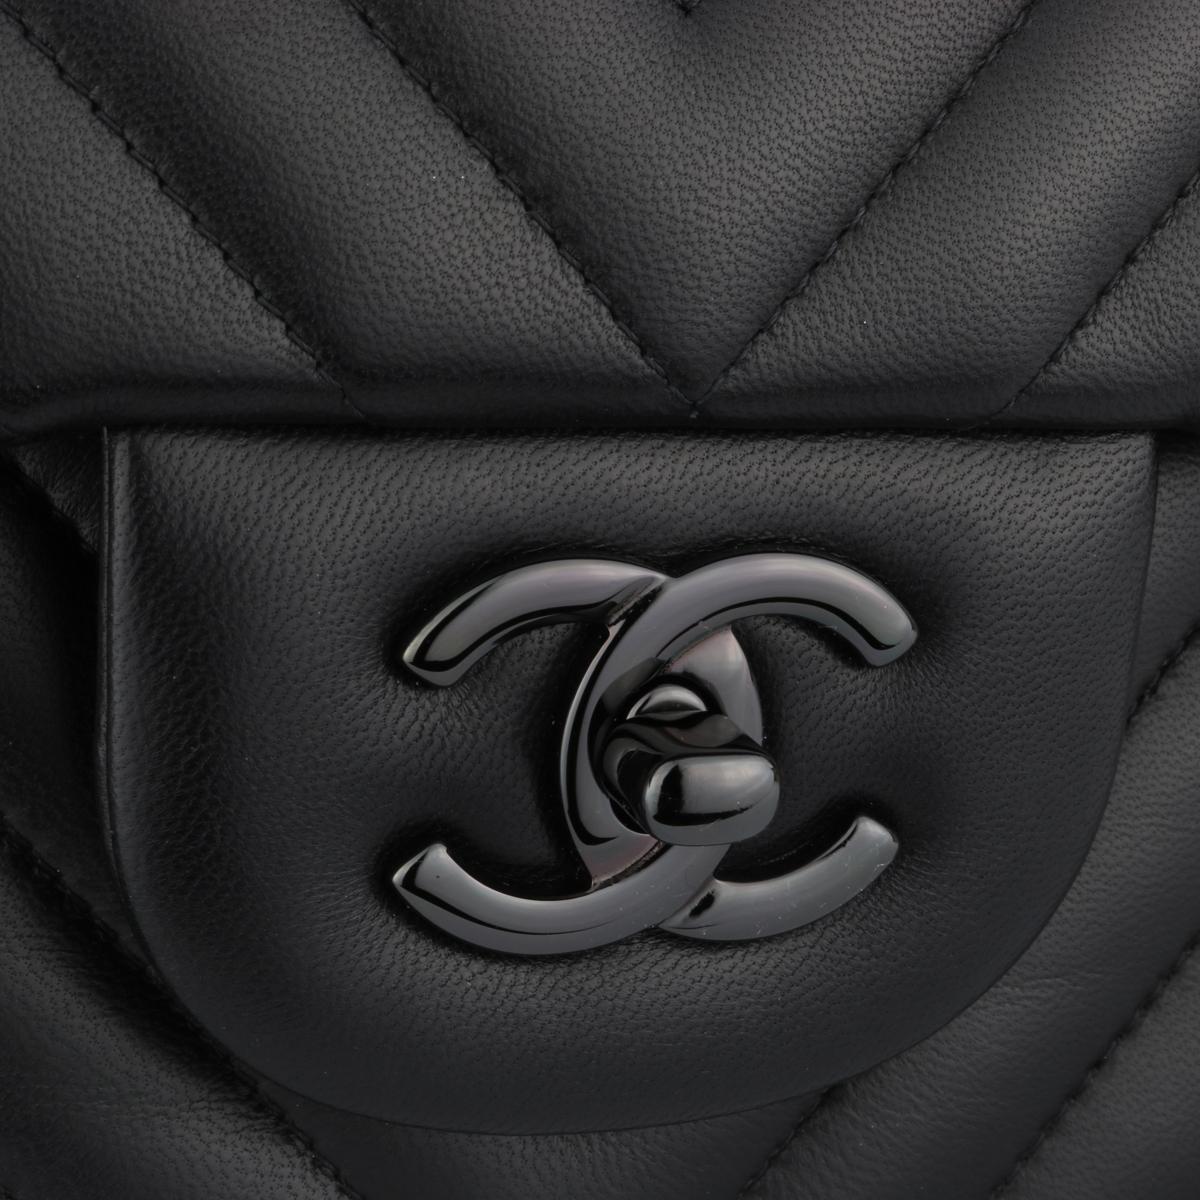 Authentic CHANEL So Black Chevron Classic Double Flap Jumbo Bag Black Lambskin with Black Hardware 2015 Limited Edition.

This stunning bag is in mint condition, the bag still holds its original shape, and the hardware is still very shiny.

Exterior